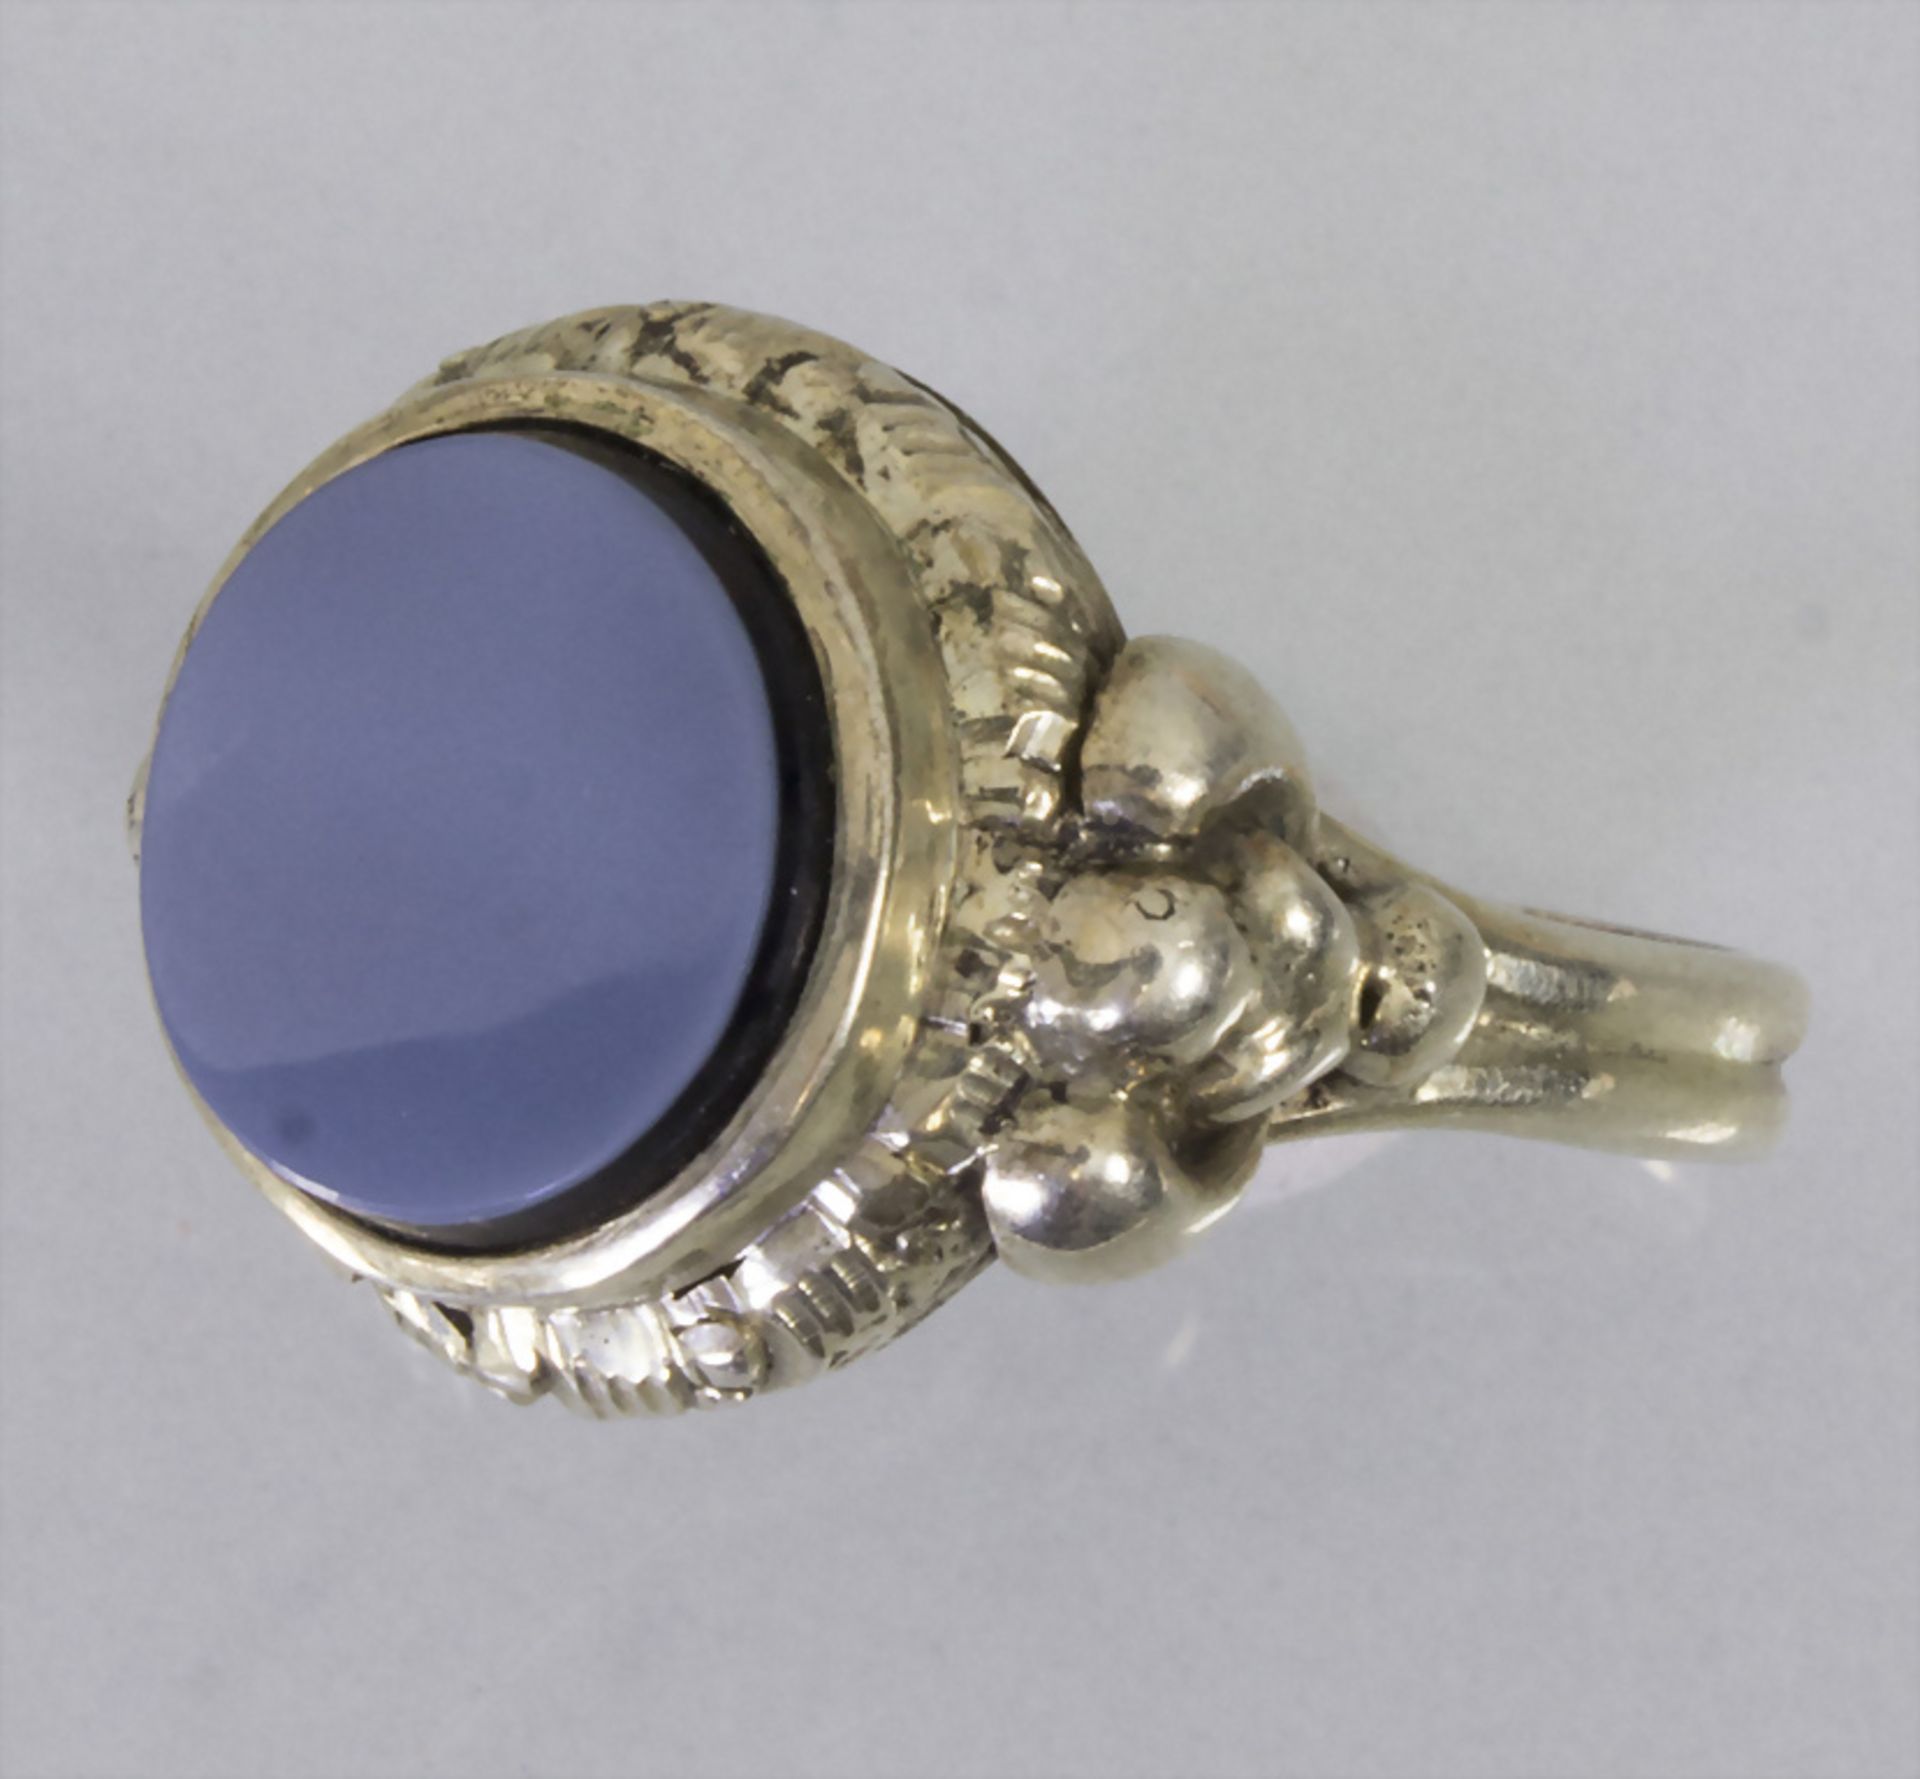 Damenring mit Achat / A gold washed silver ring with agate